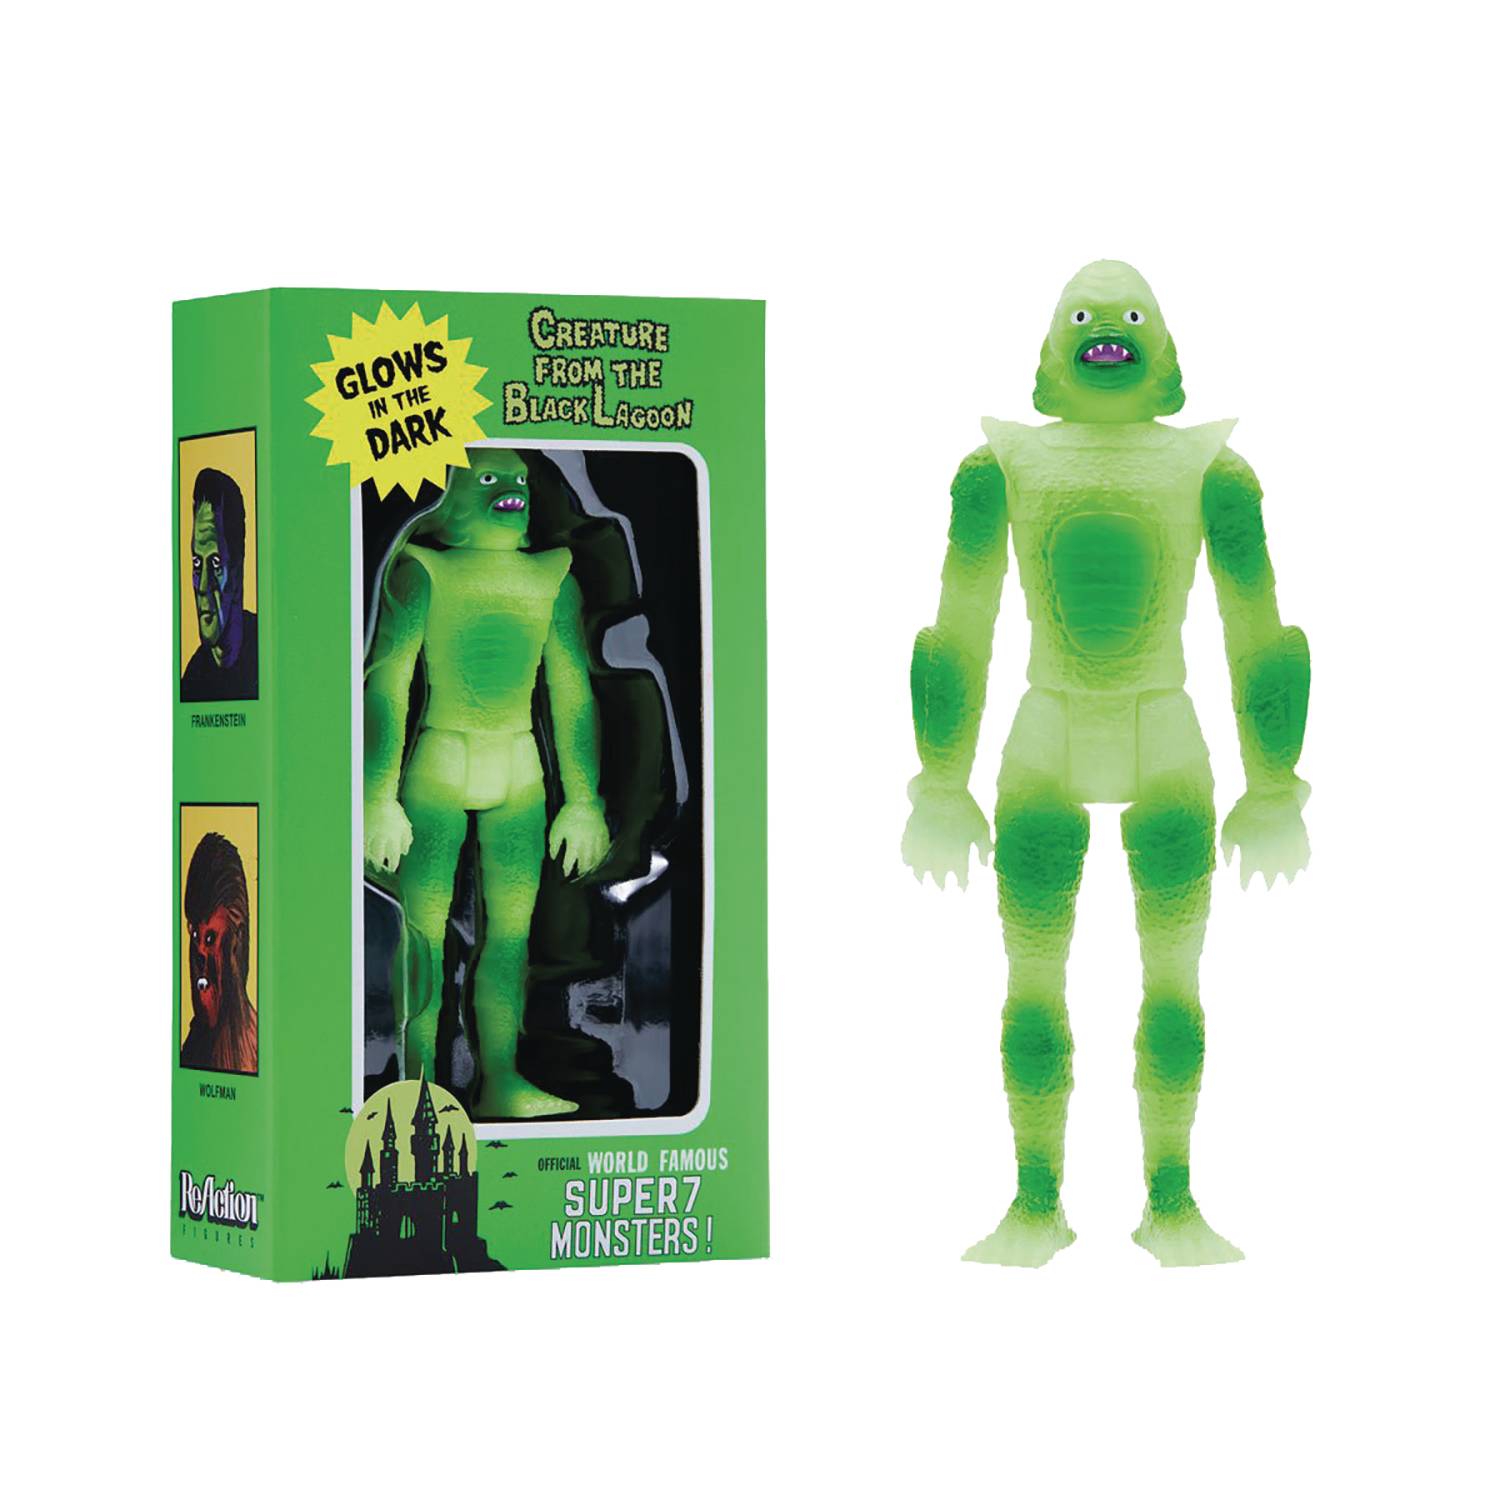 CREATURE FROM THE BLACK LAGOON GITD SUPER SHE CREATURE AF (C